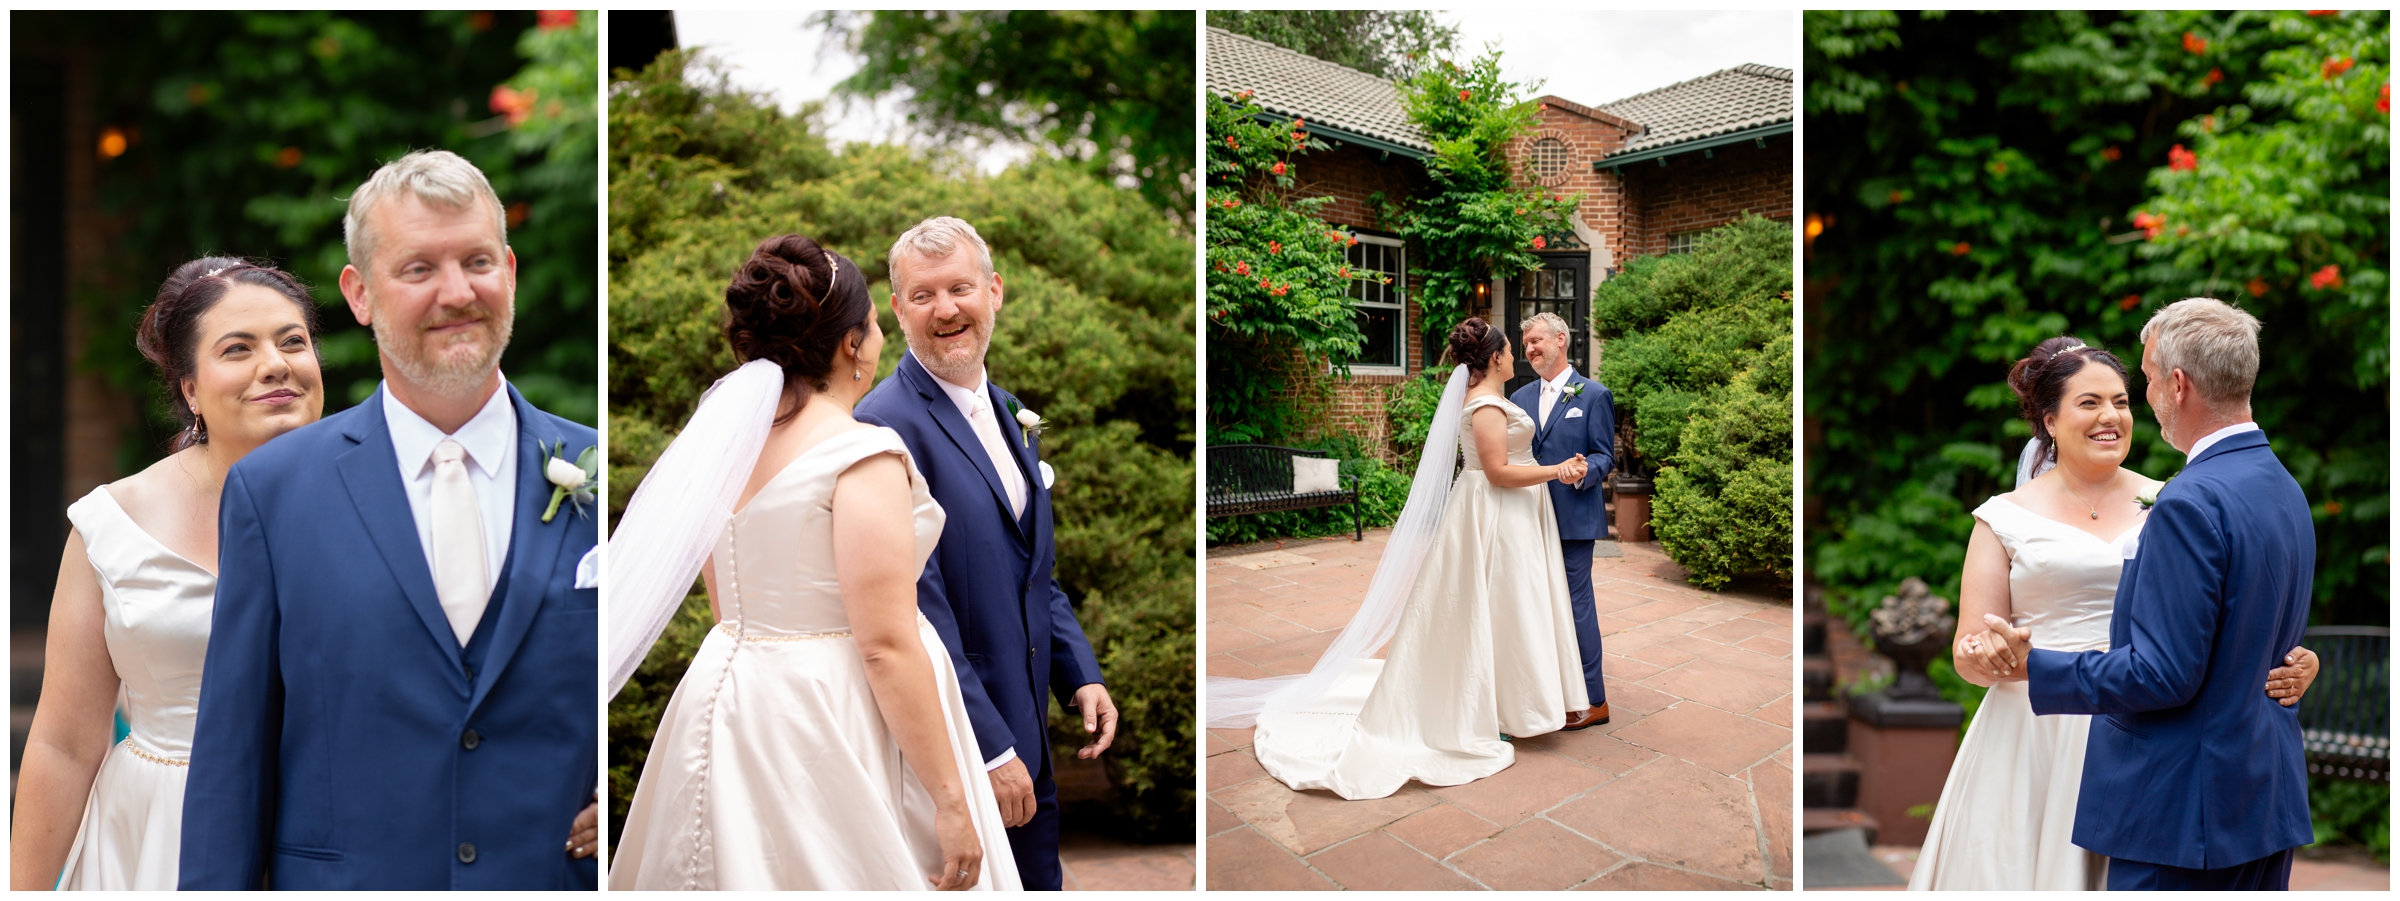 bride and groom first look during summer wedding at Dove House at Lionsgate event center 